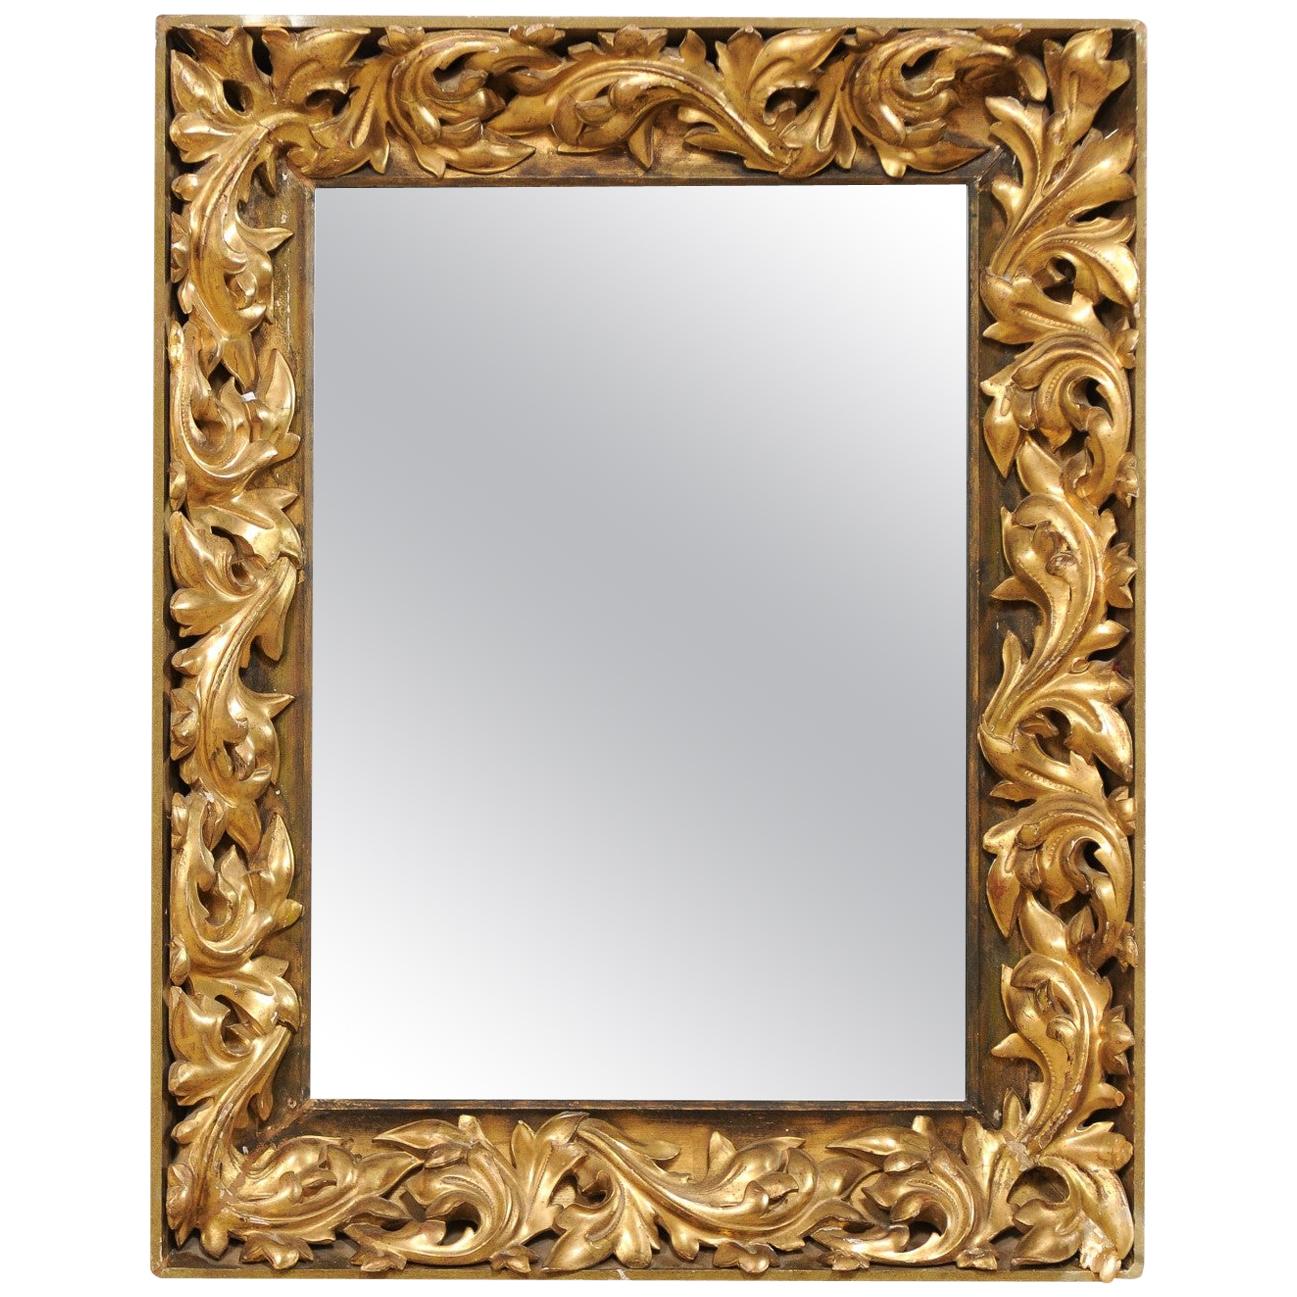 French 19th Century Rectangular-Shaped, Rococo Carved and Giltwood Mirror